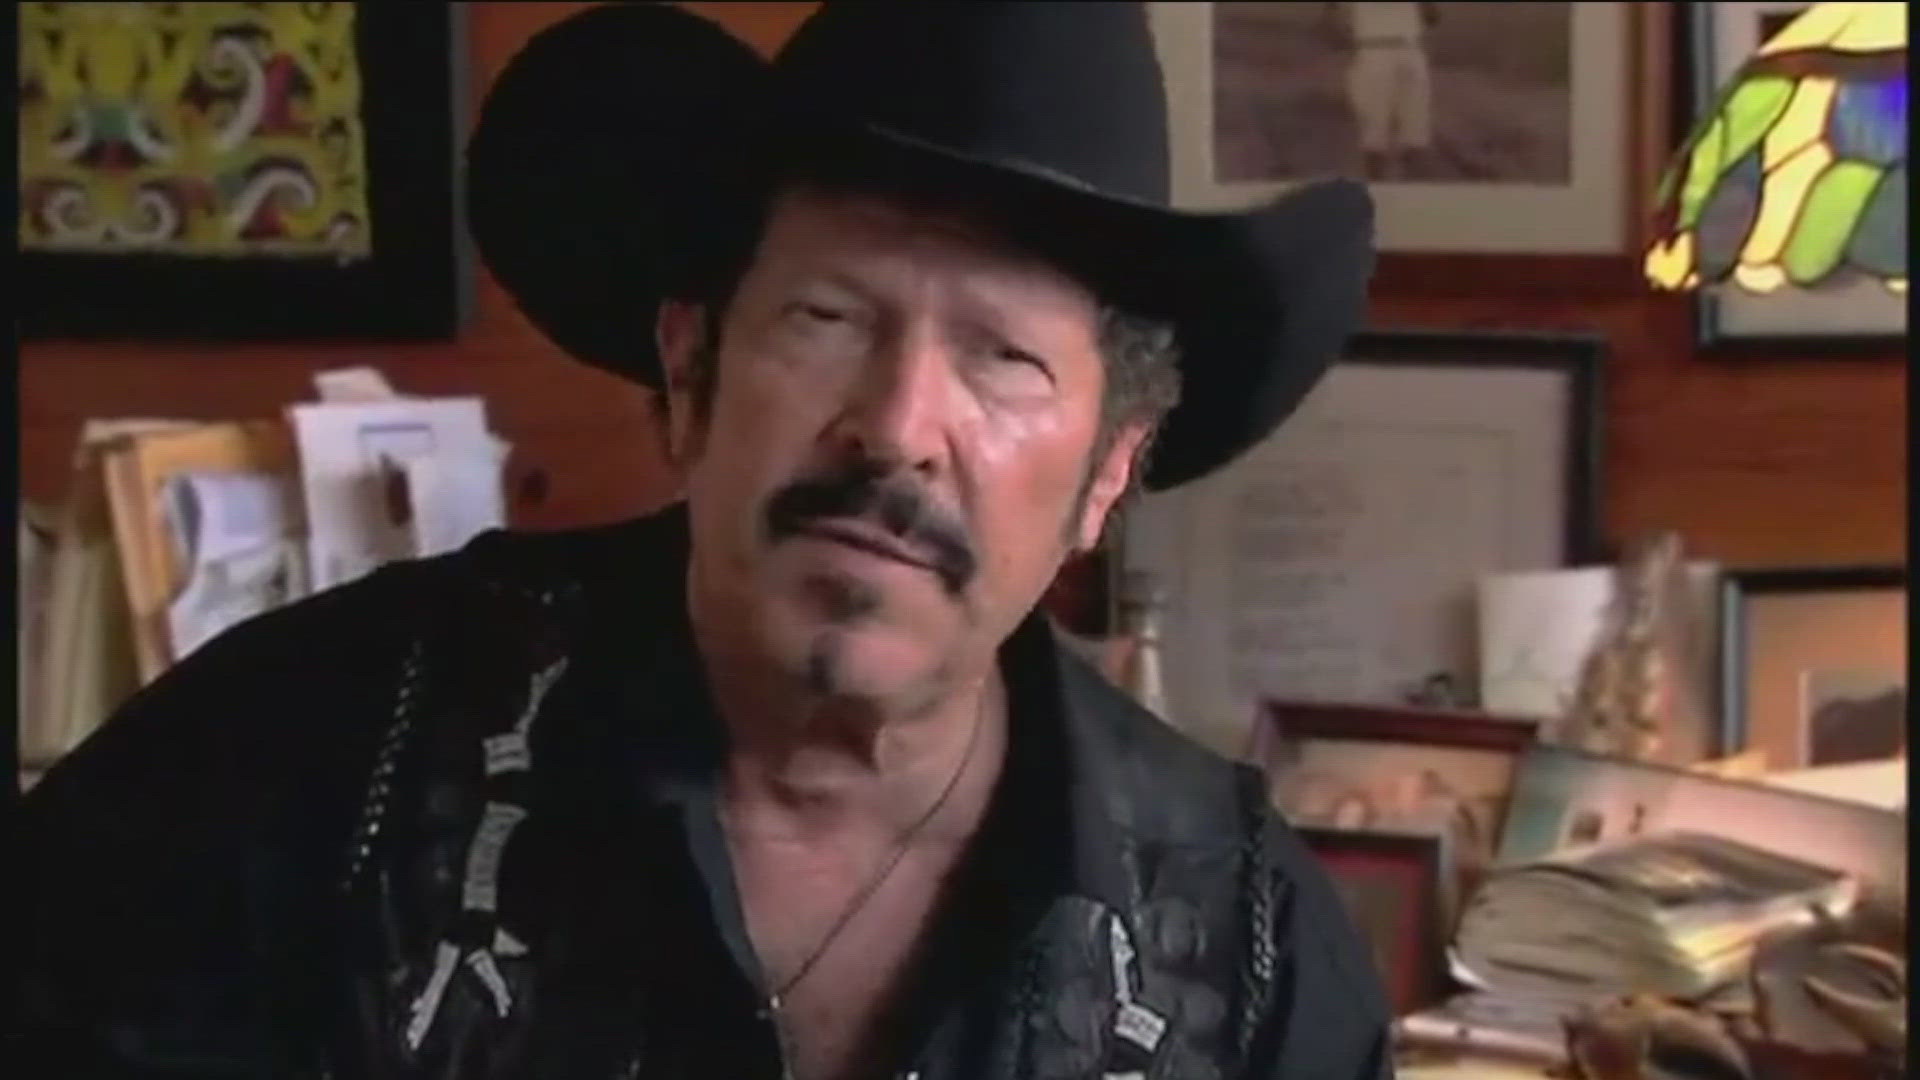 Kinky Friedman – a singer, author and one-time candidate for Texas governor – died at his home in the Texas Hill Country on June 27.